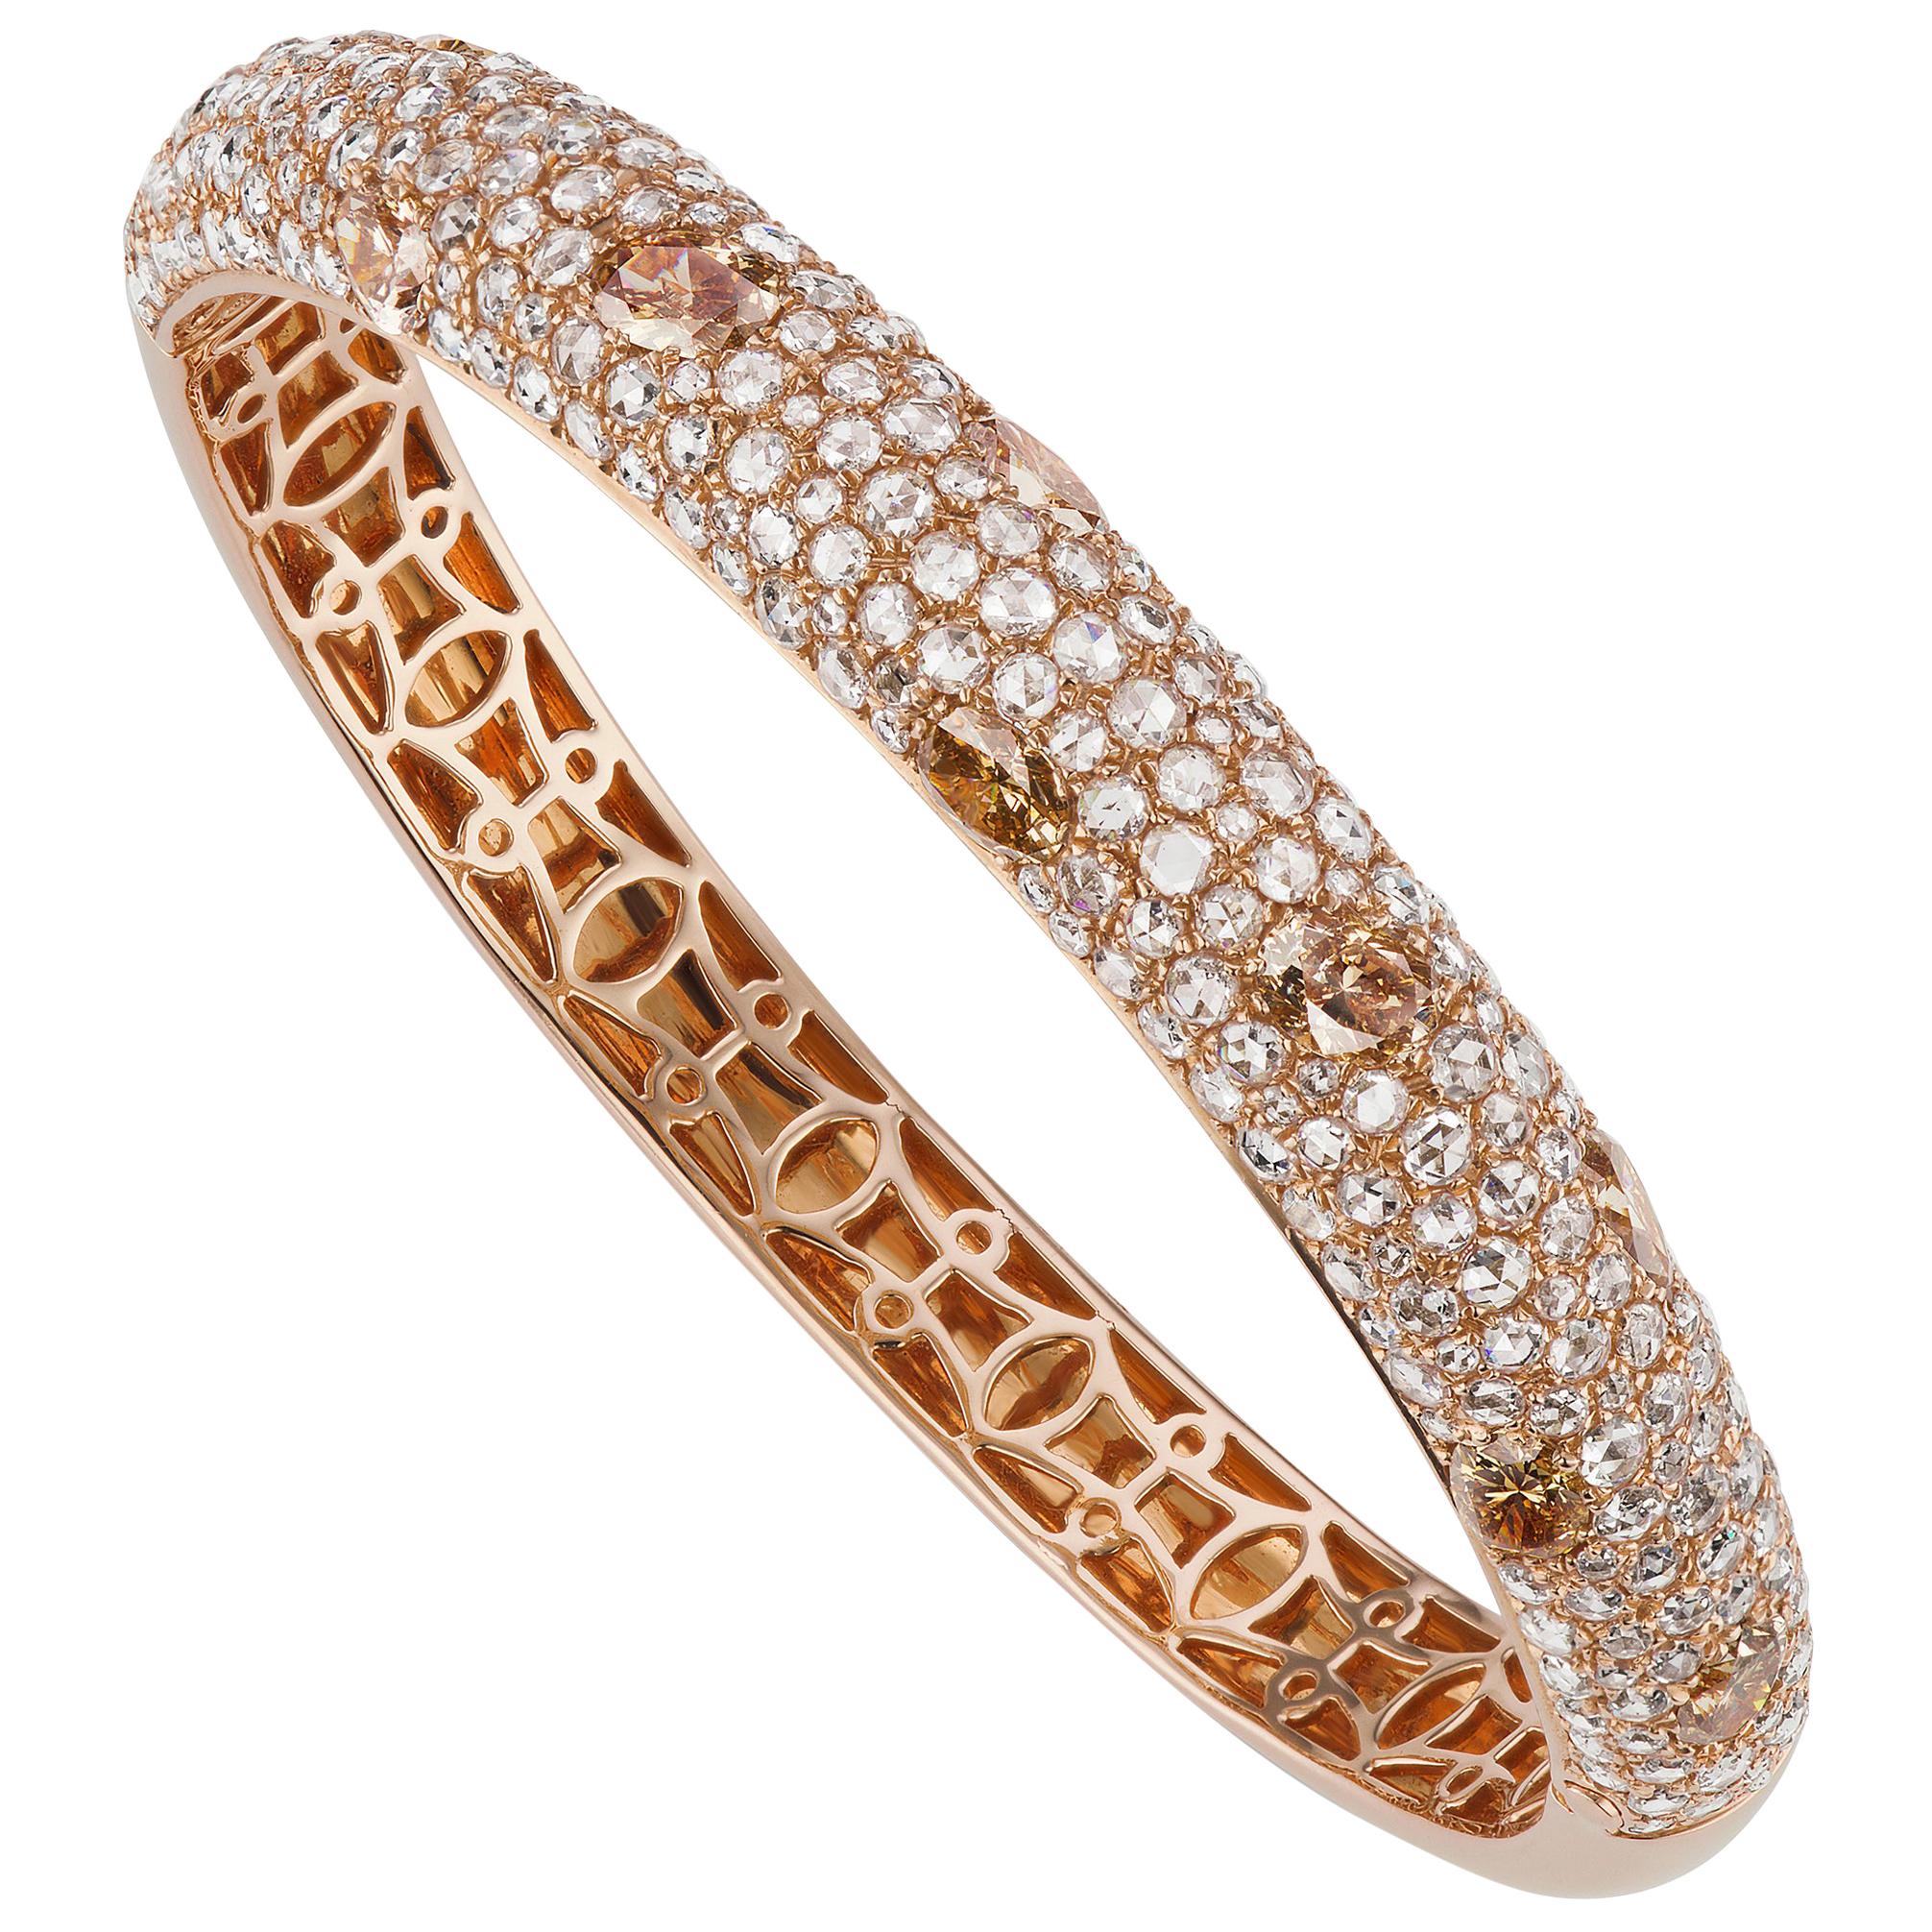 Bangle in 18K Rose Gold with Diamond